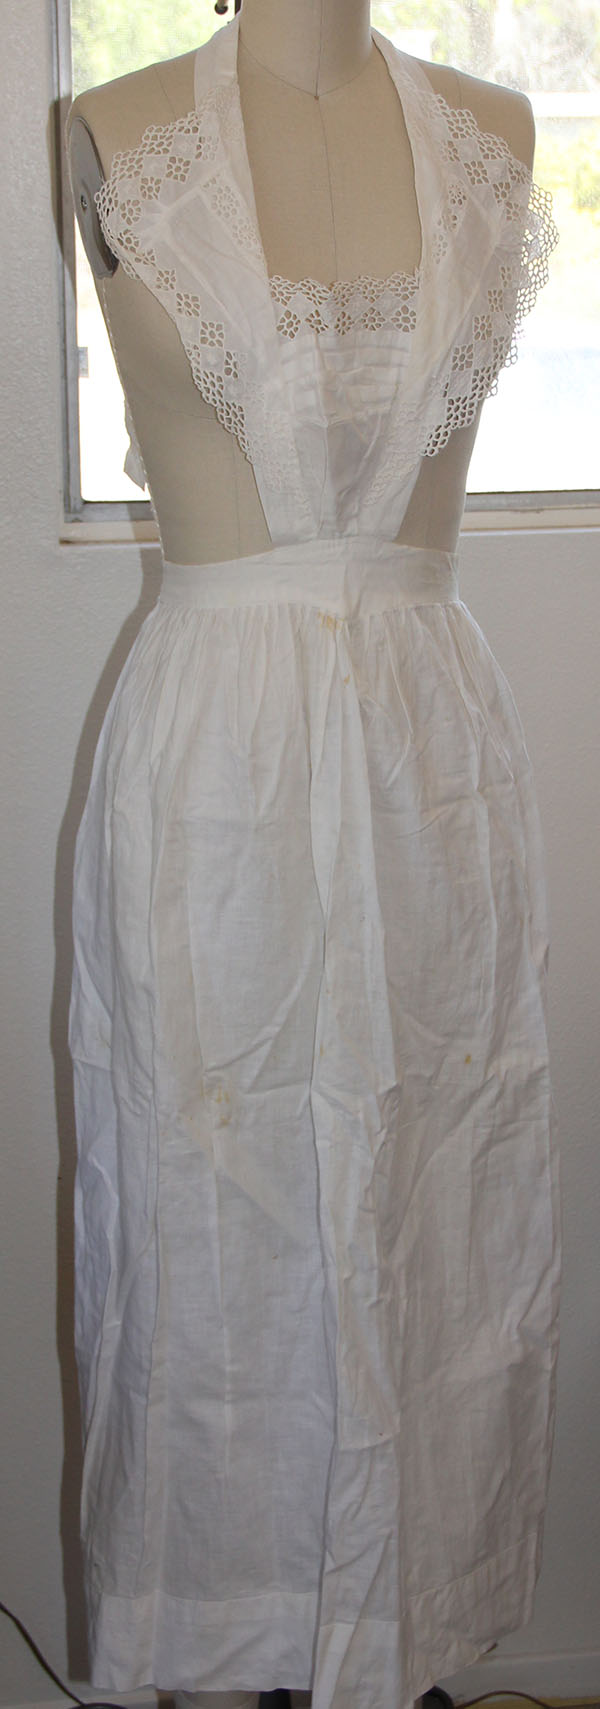 Early-20th Century Apron